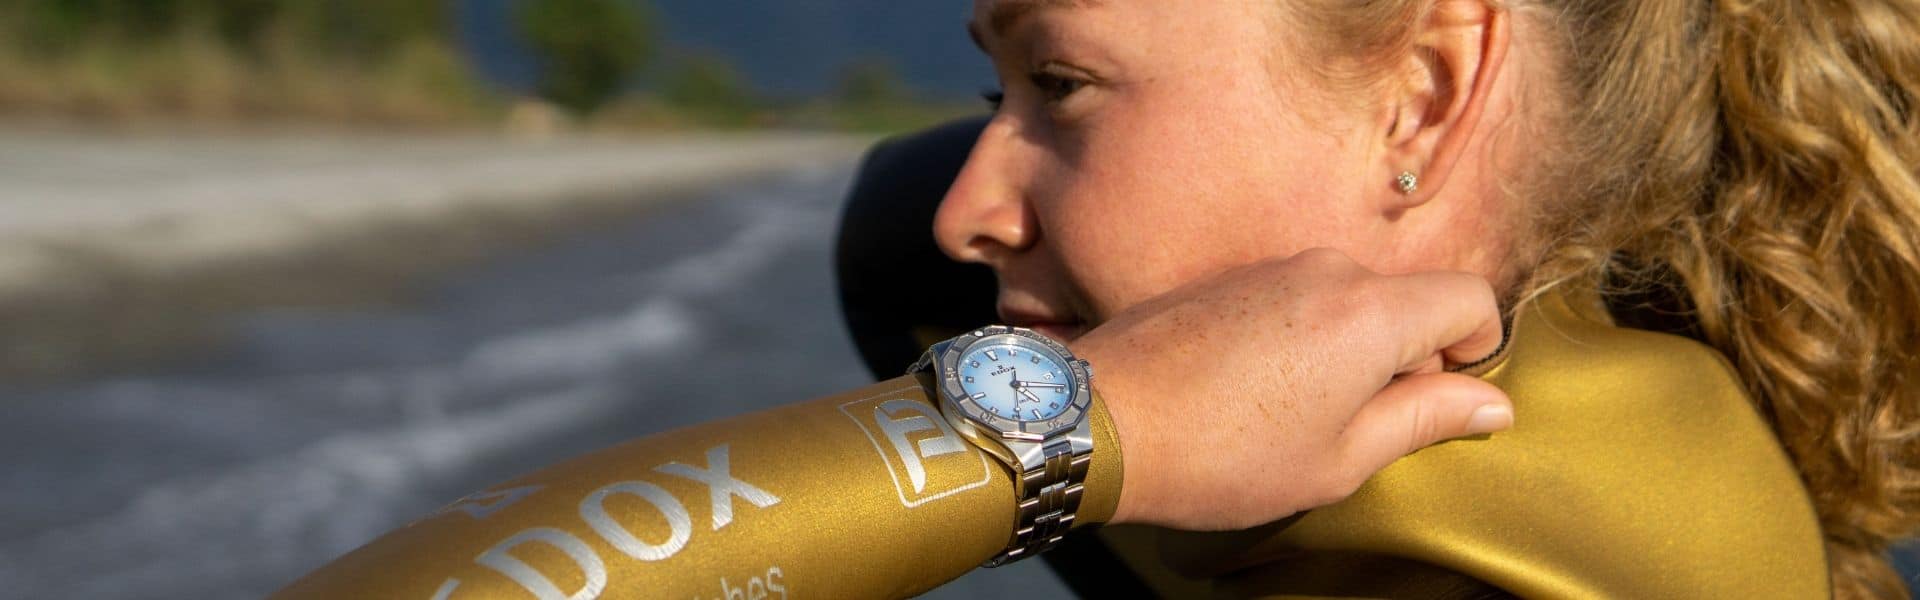 EDOX DELFIN DIVER DATE LADY SPECIAL EDITION IN COLLABORATION WITH MARIANNA GILLESPIE - Edox Watches